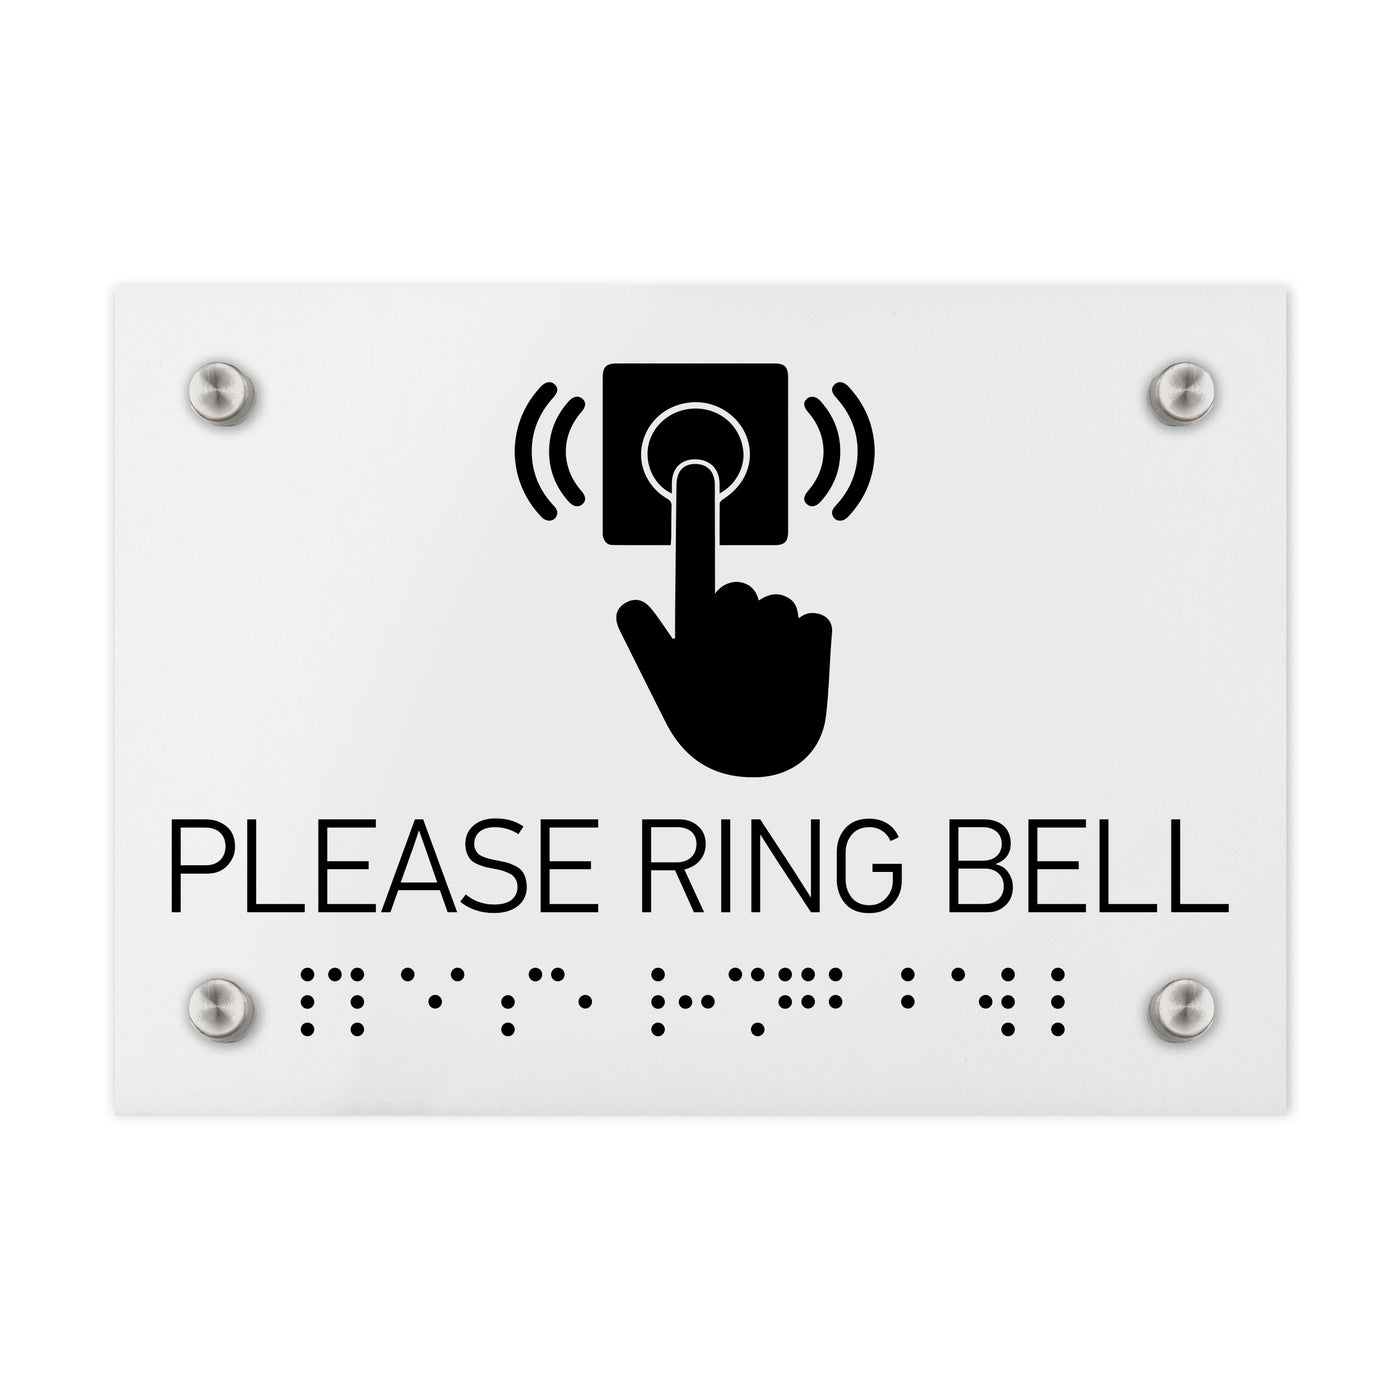 PLEASE RING BELL FOR ASSISTANCE Metal Door Sign Plaque House Office  20x7.5cm Fra | eBay